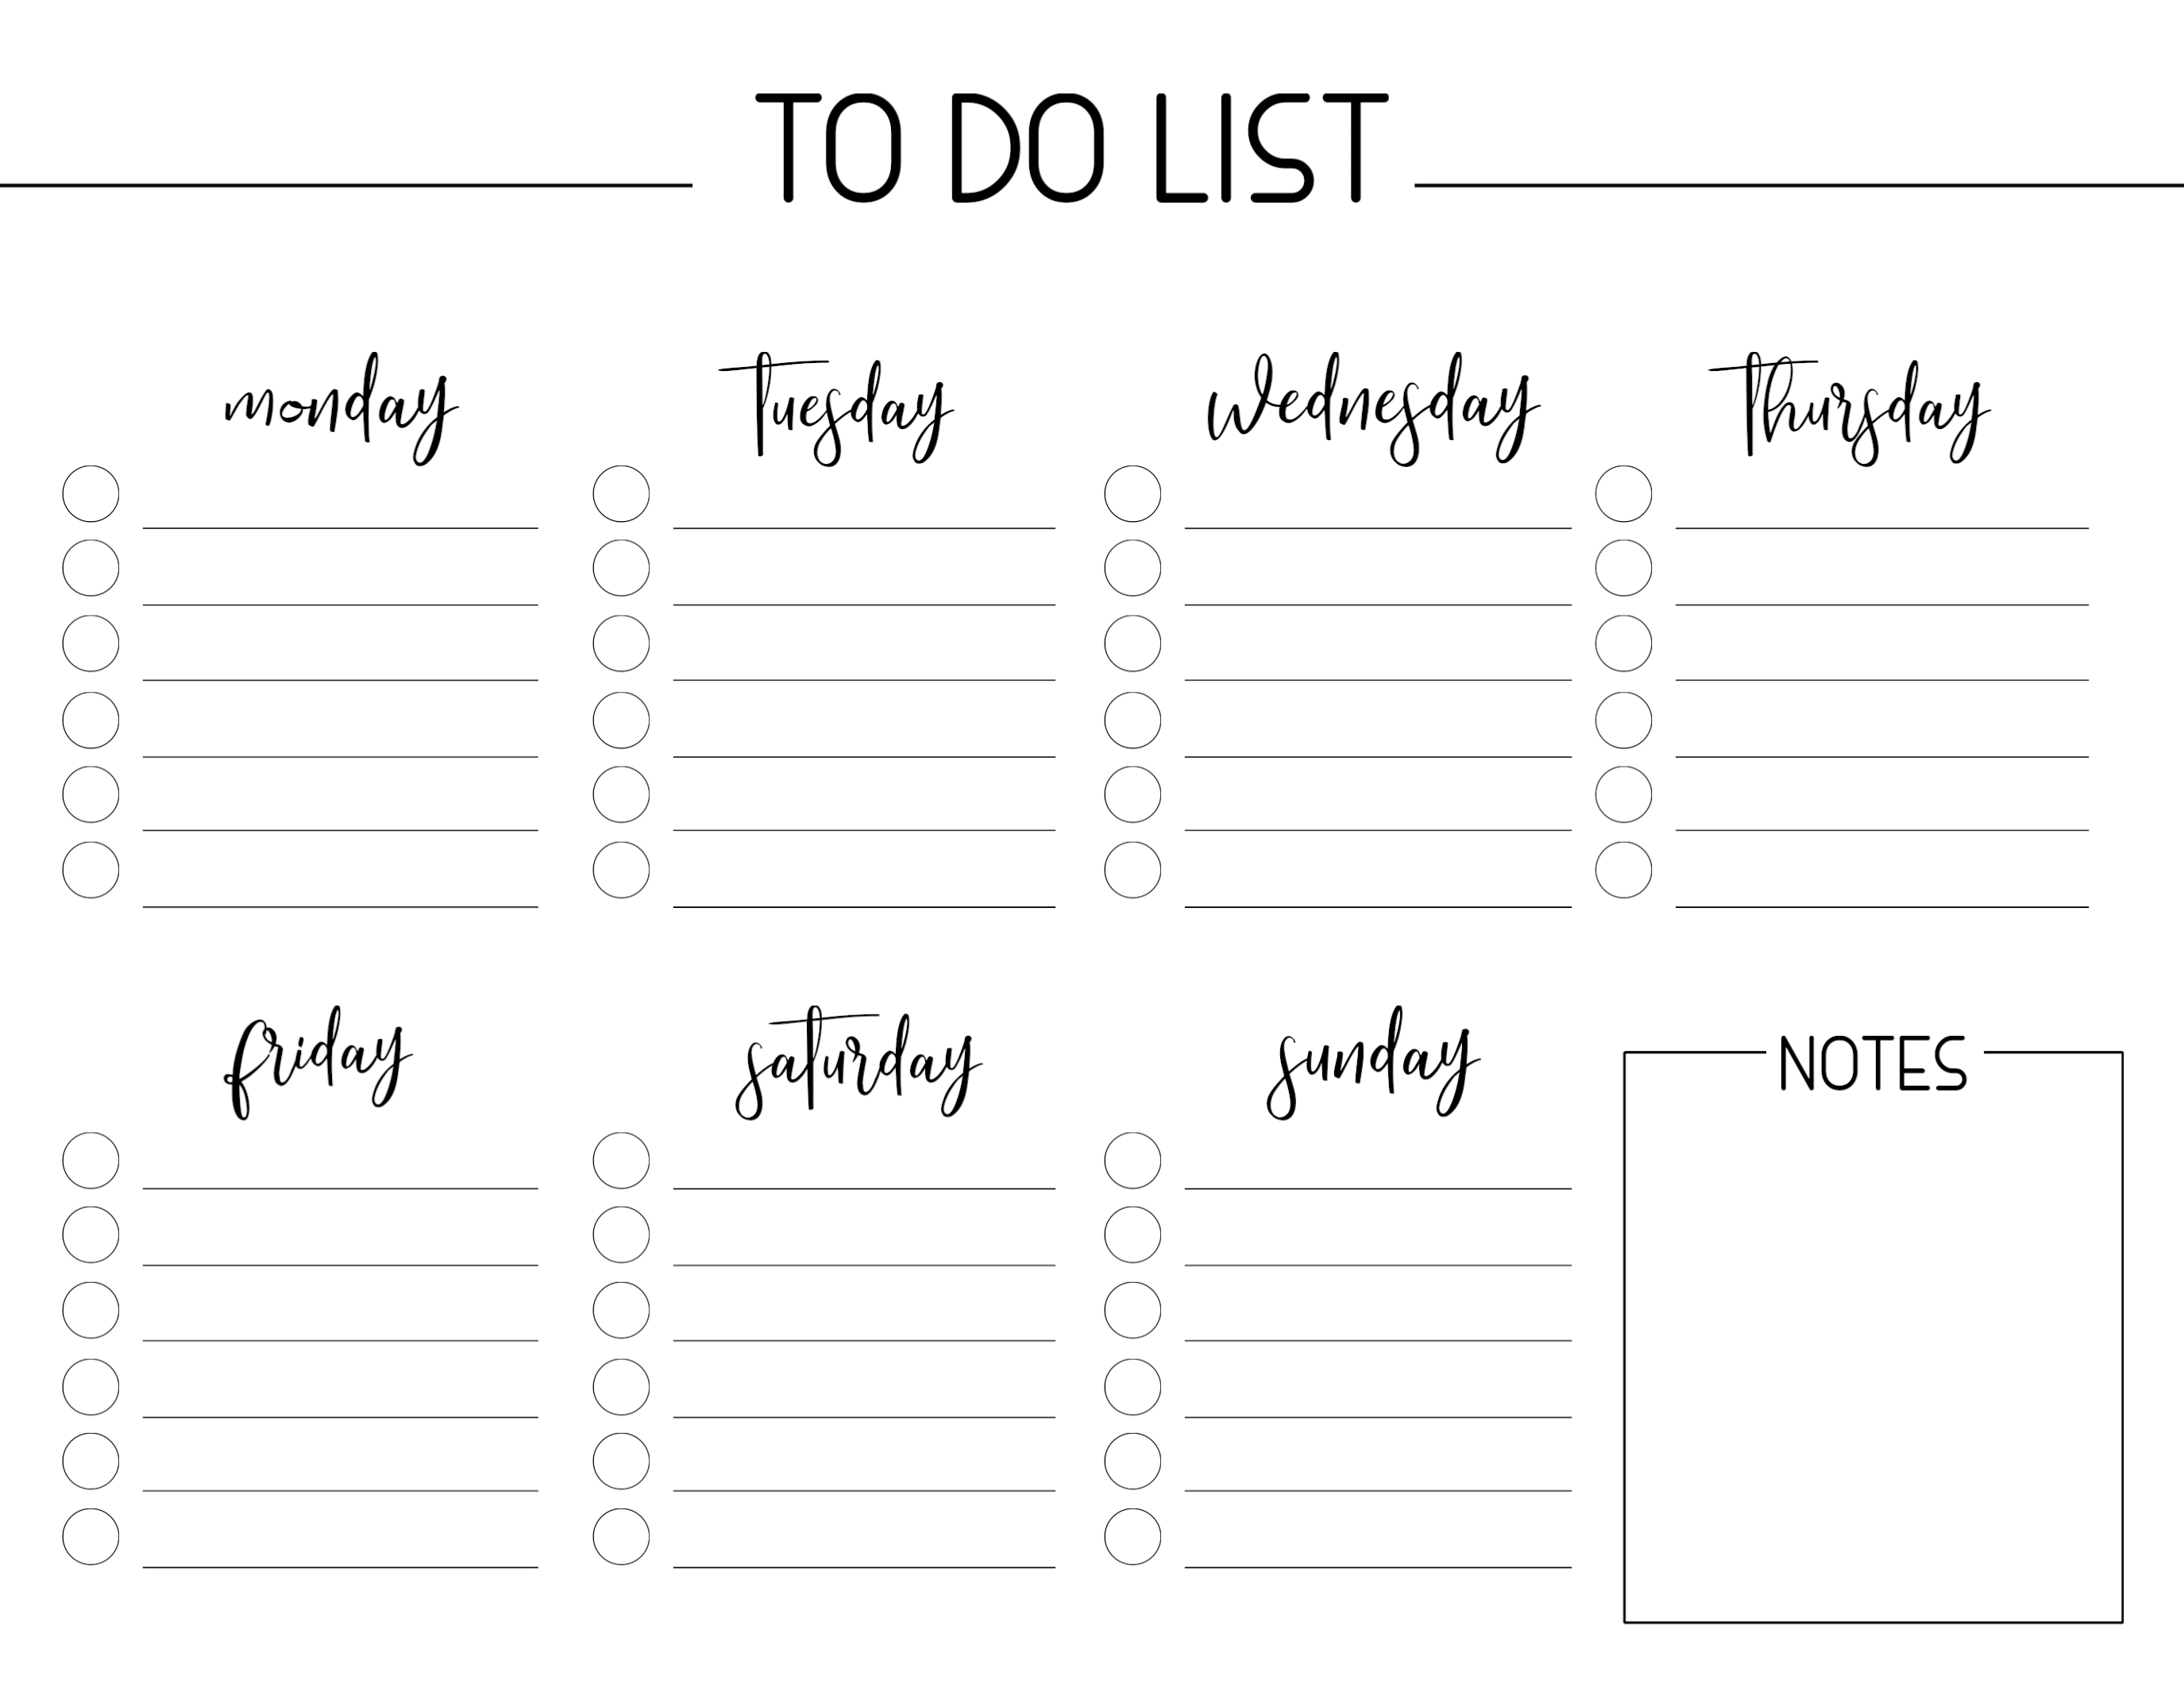 weekly-free-printable-to-do-list-paper-trail-design